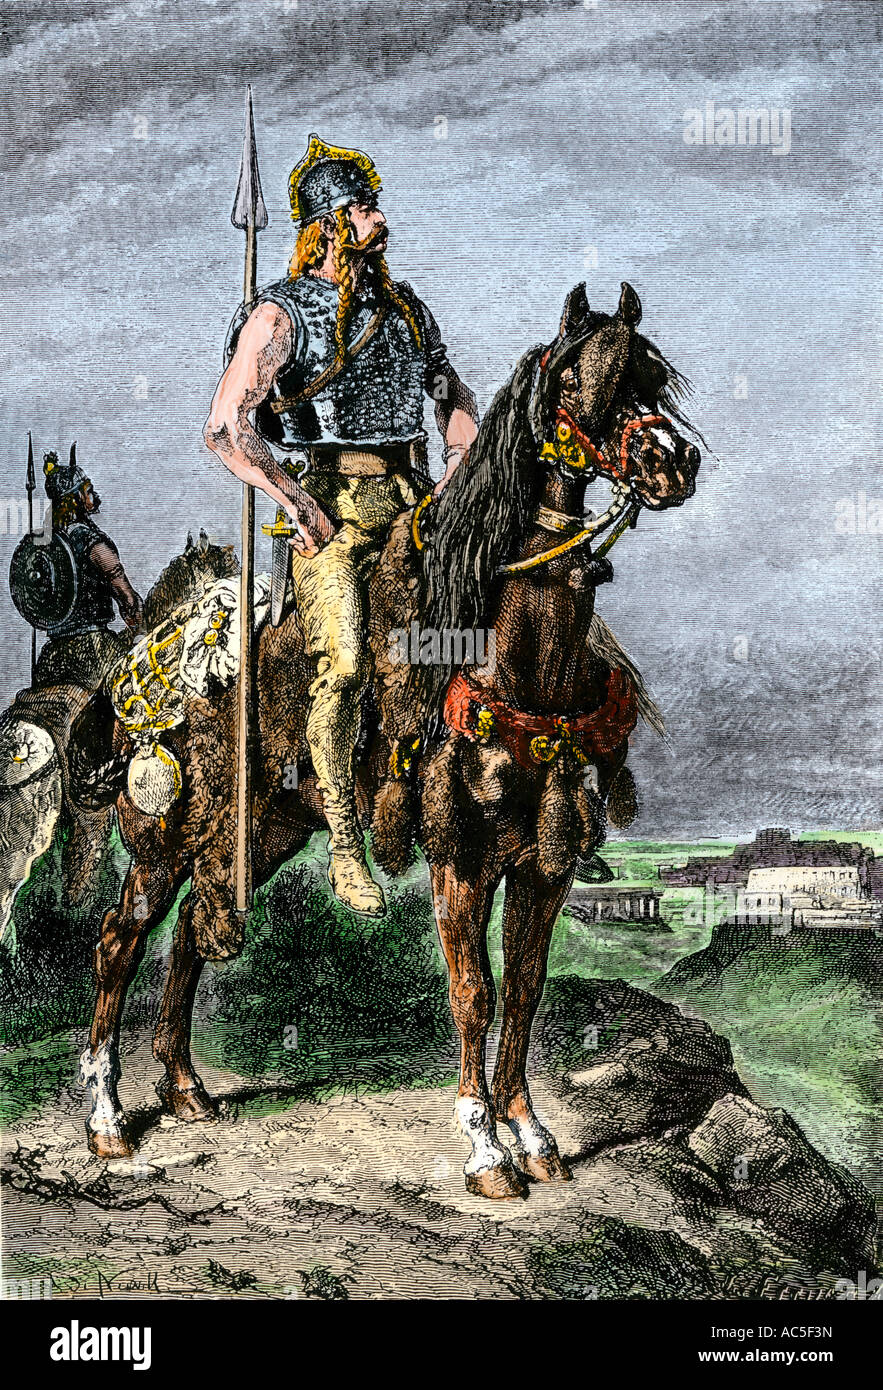 Gauls on horseback in the ancient Roman Empire. Hand-colored woodcut Stock Photo